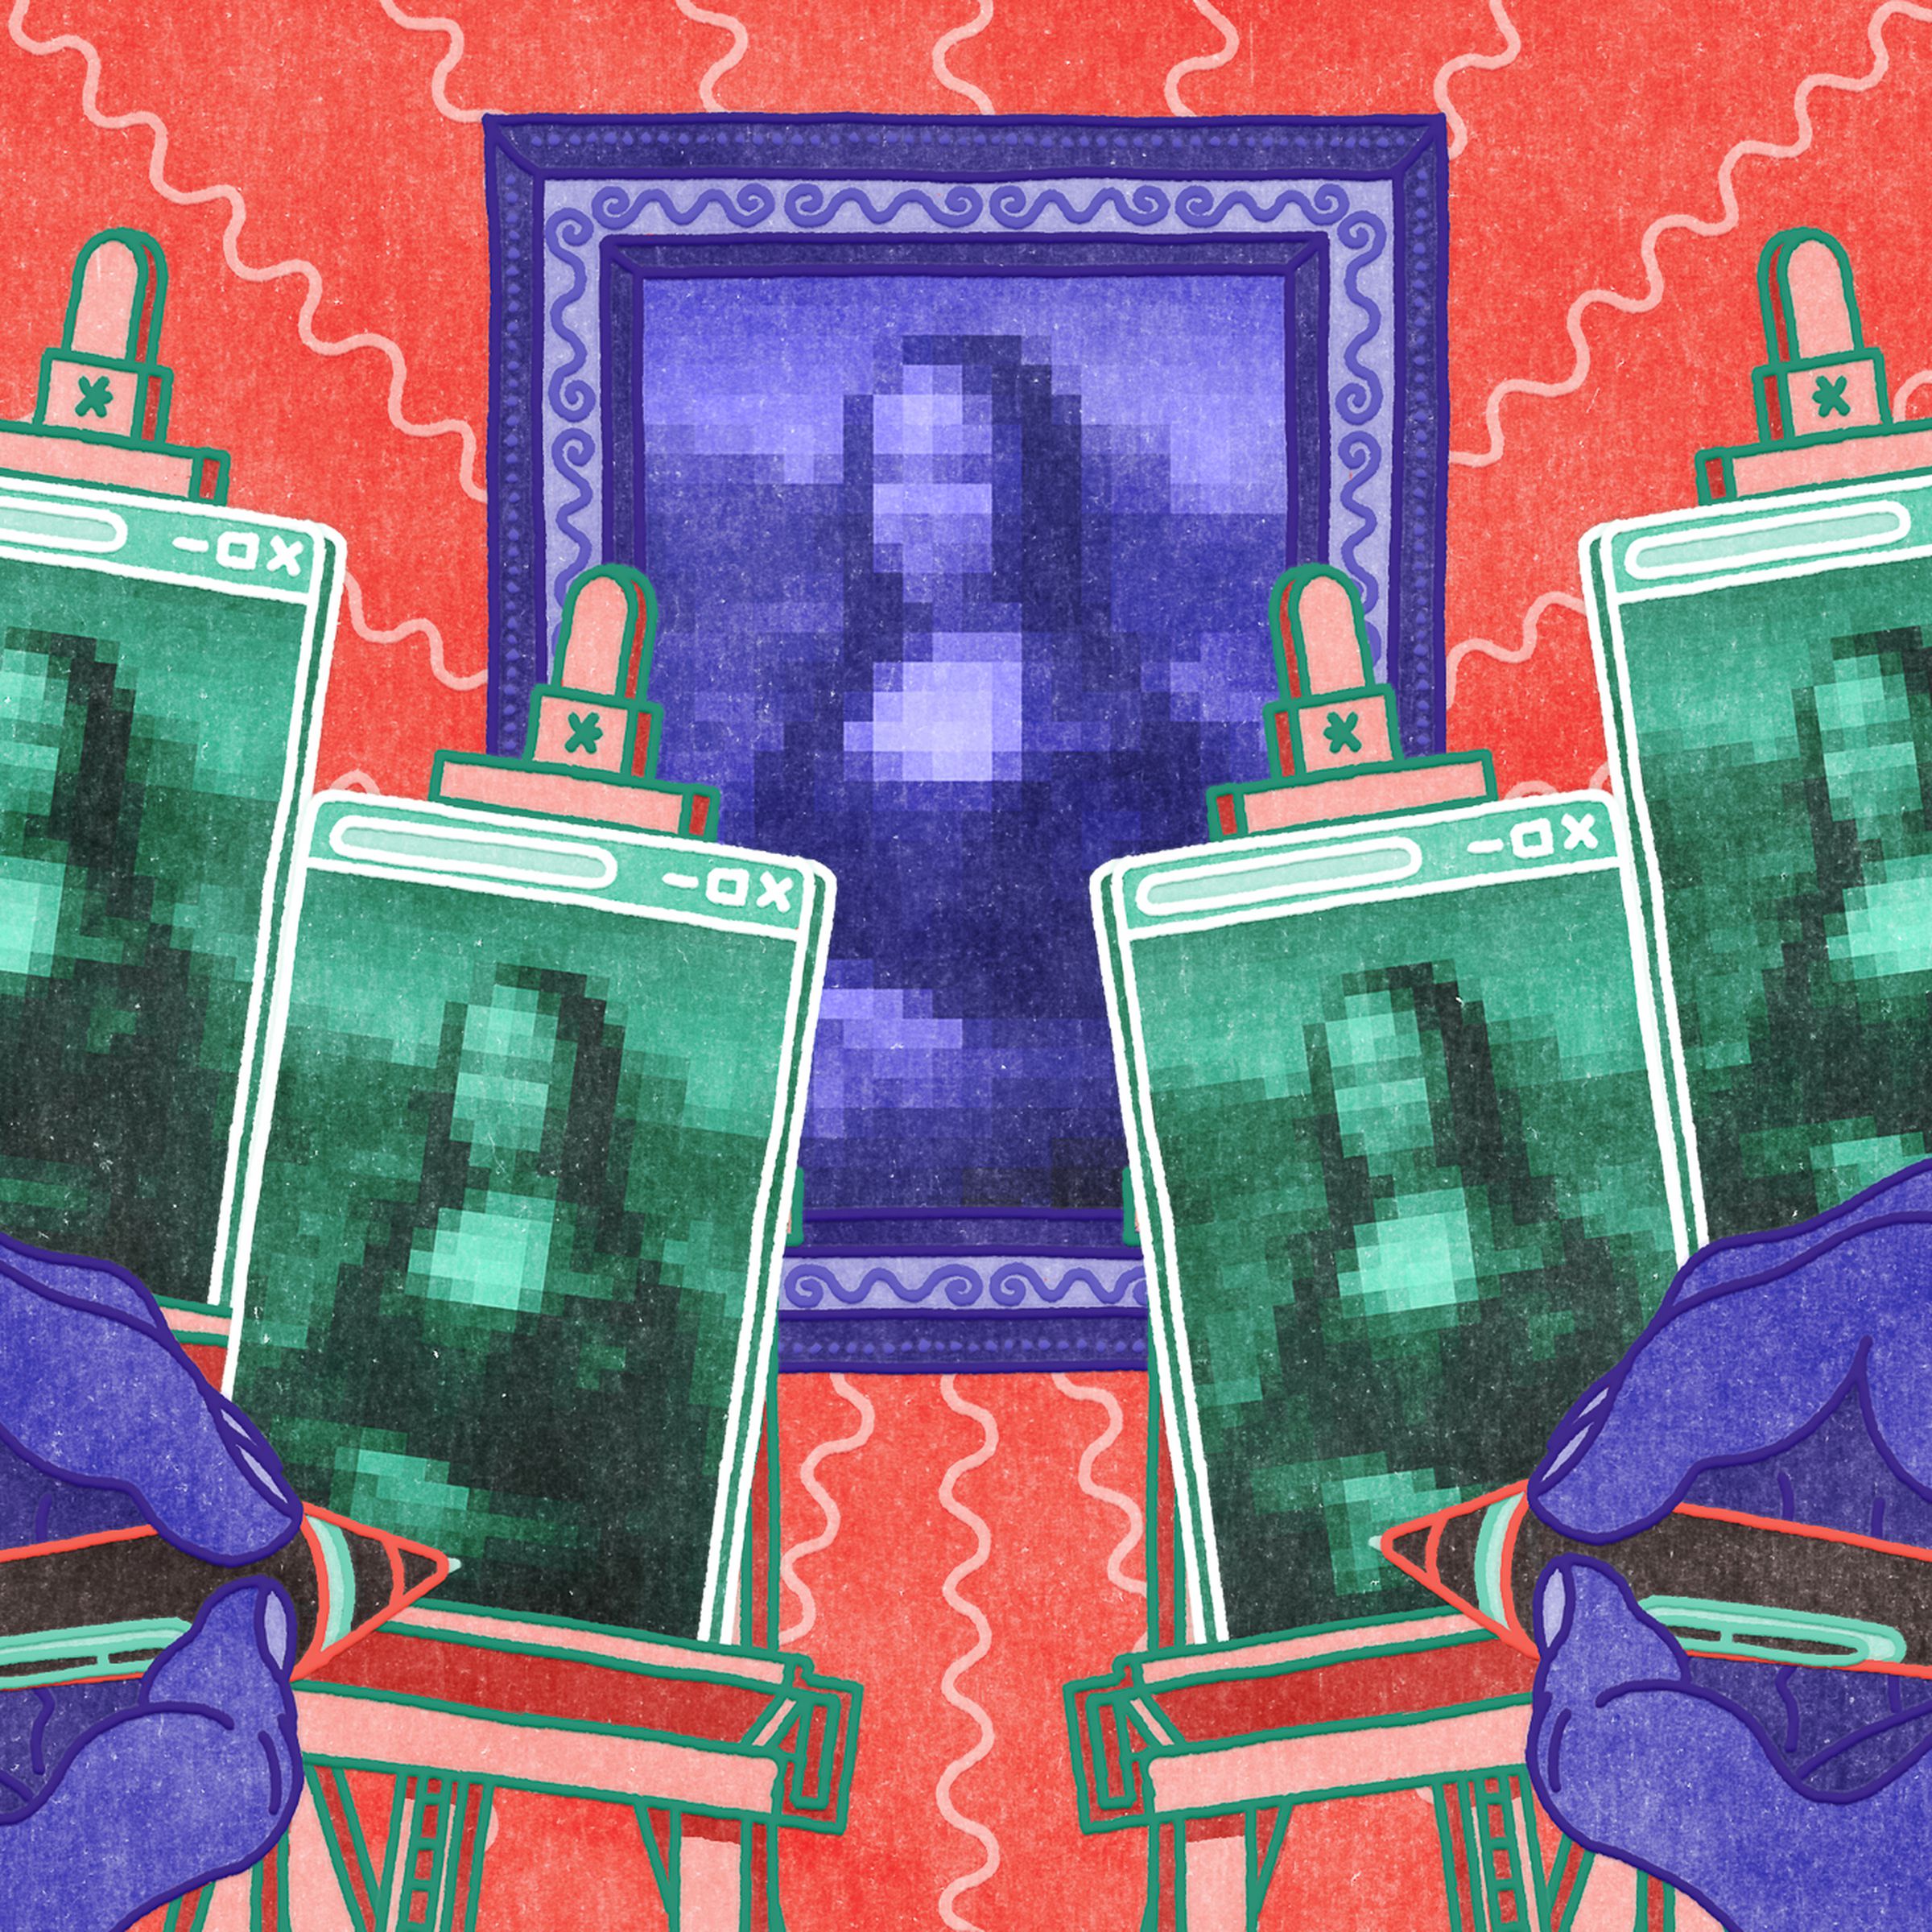 A stylized illustration of artists all copying the same pixelated Mona Lisa.